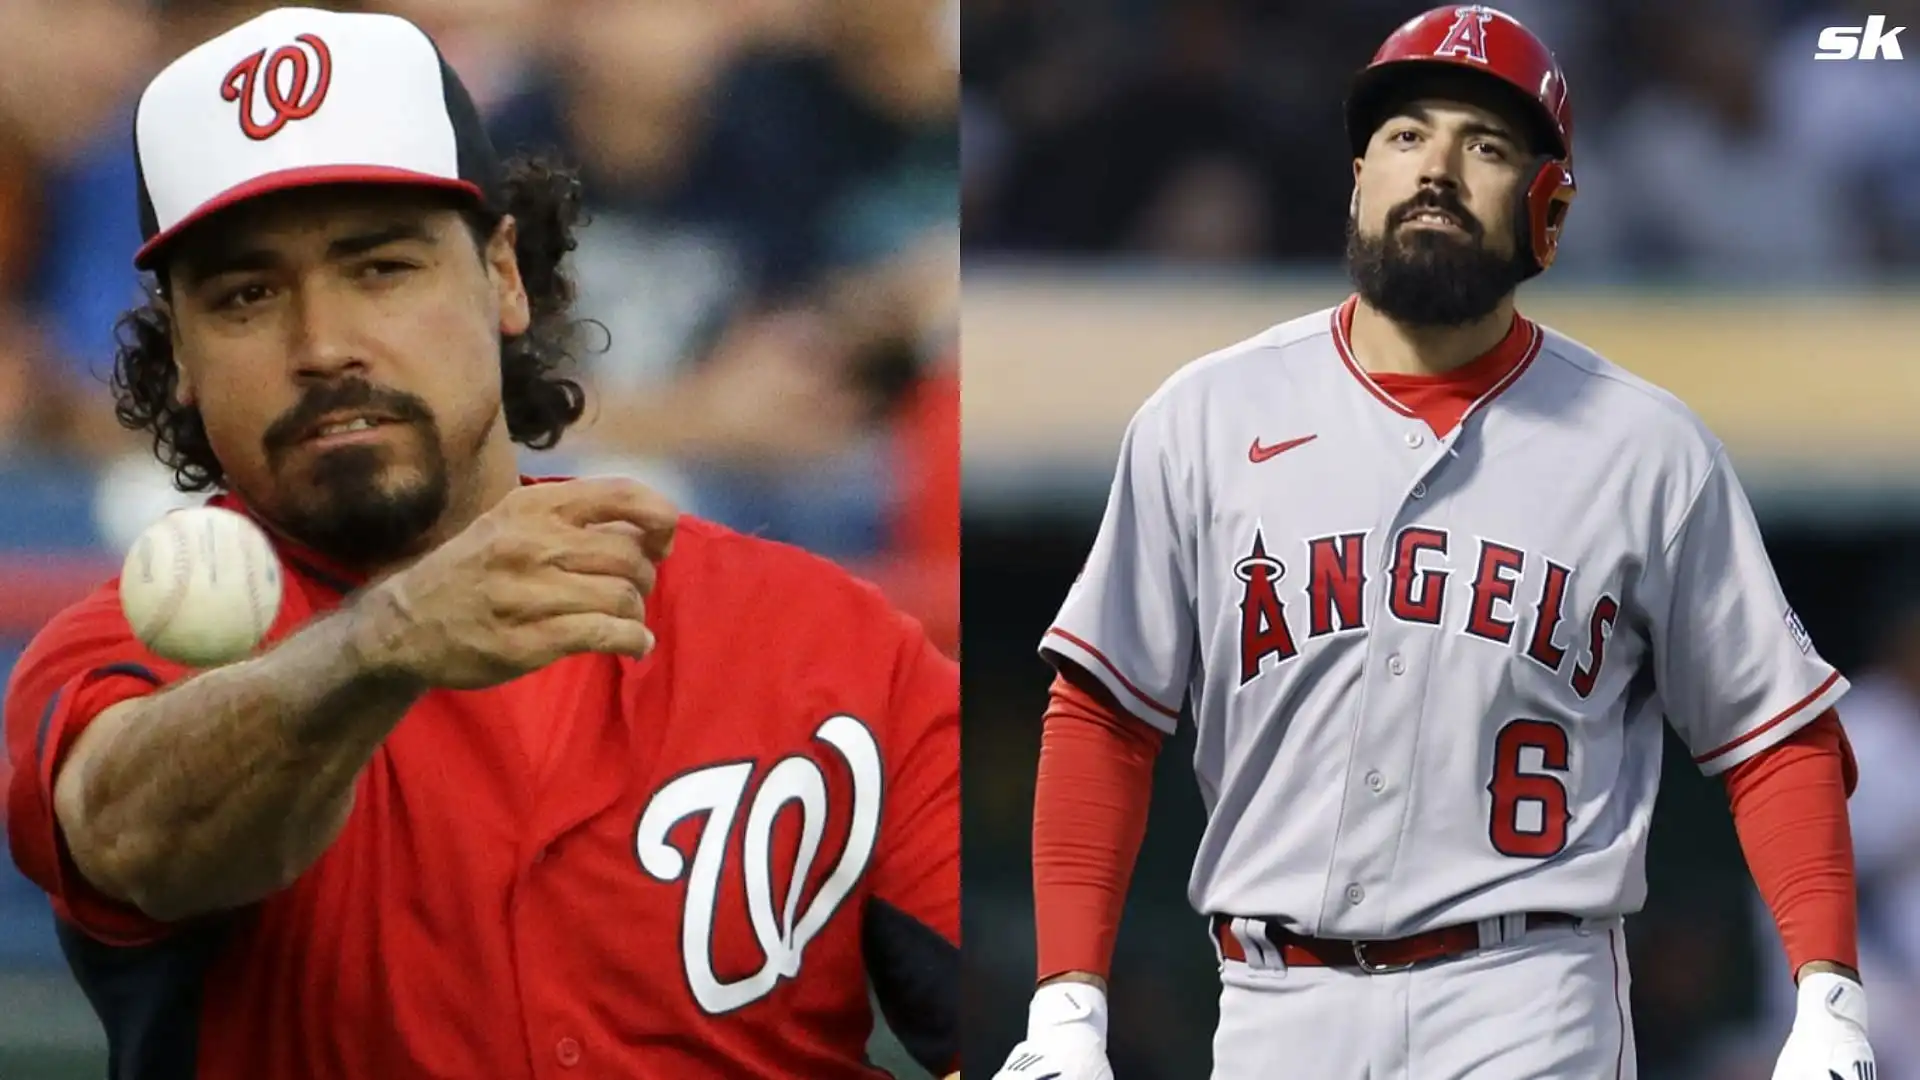 Anthony Rendon dodges injury questions with sarcastic "No habla inglés" remark - Today's incident.